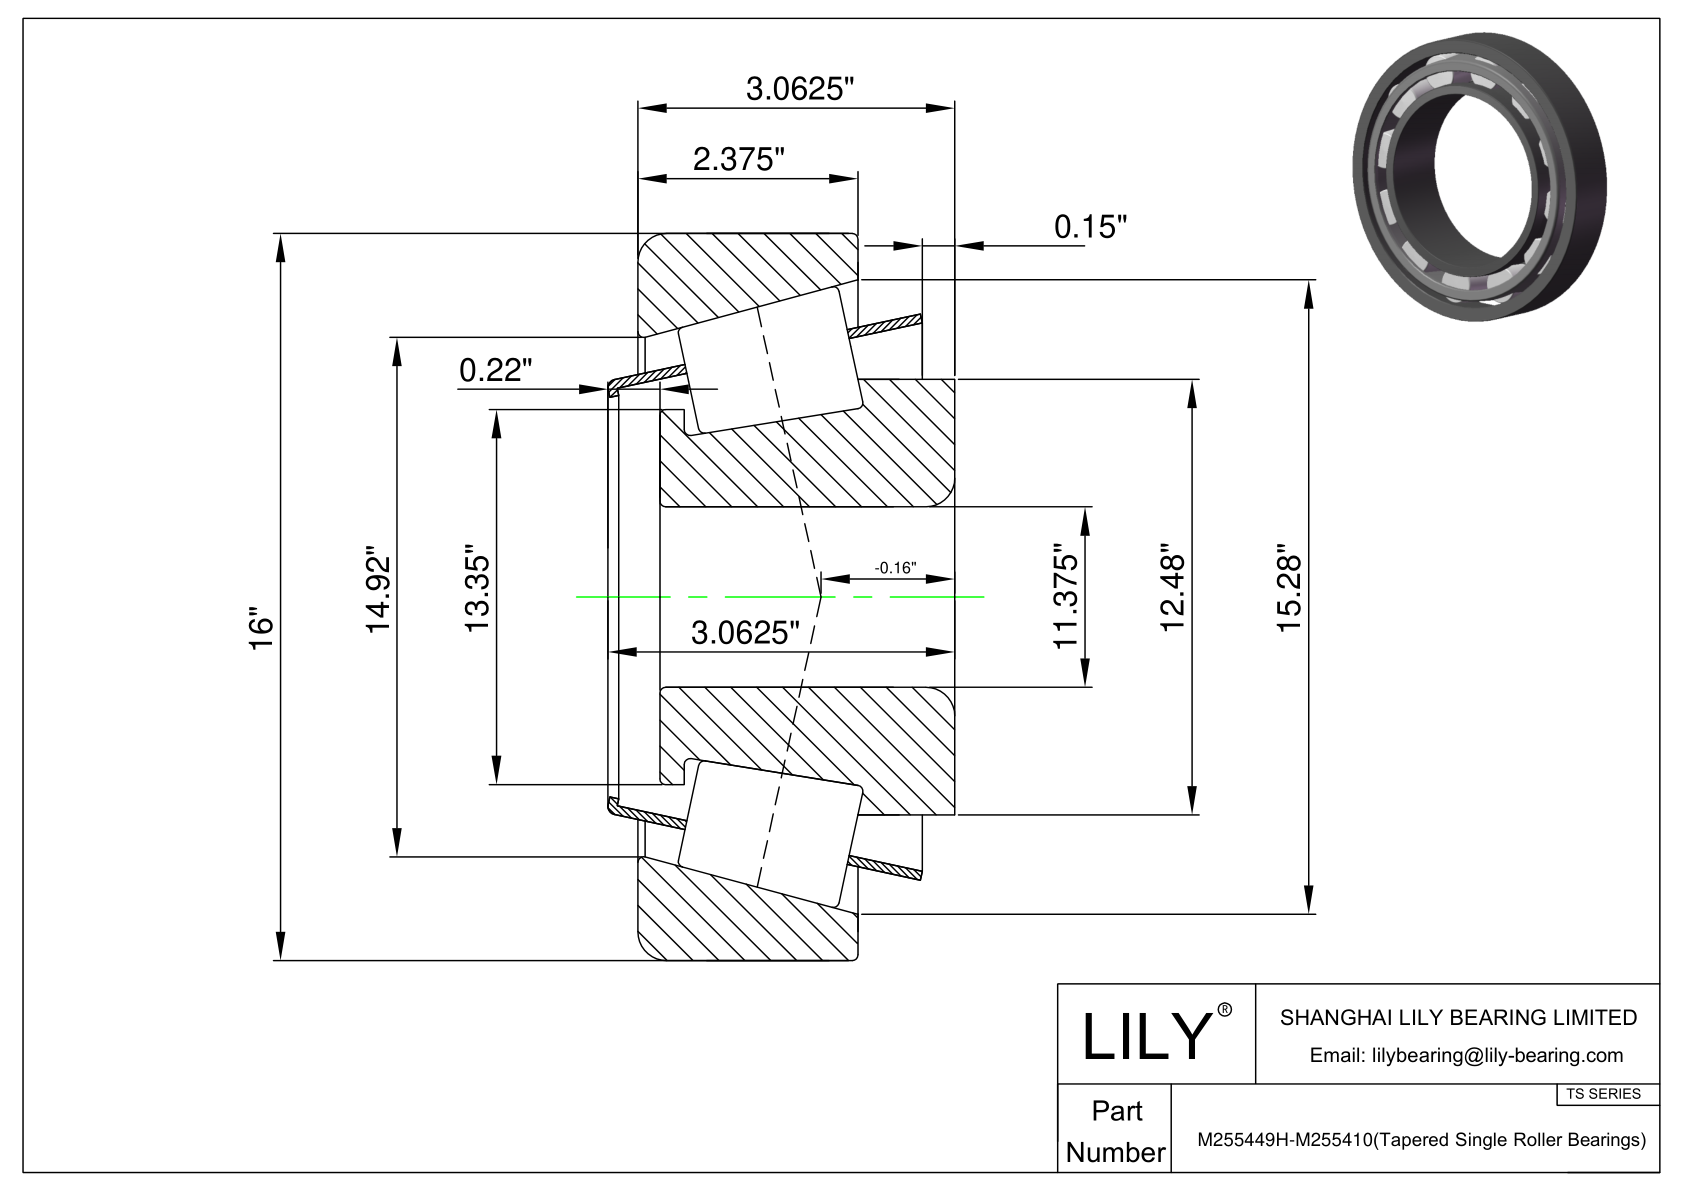 M255449H-M255410 TS (Tapered Single Roller Bearings) (Imperial) cad drawing